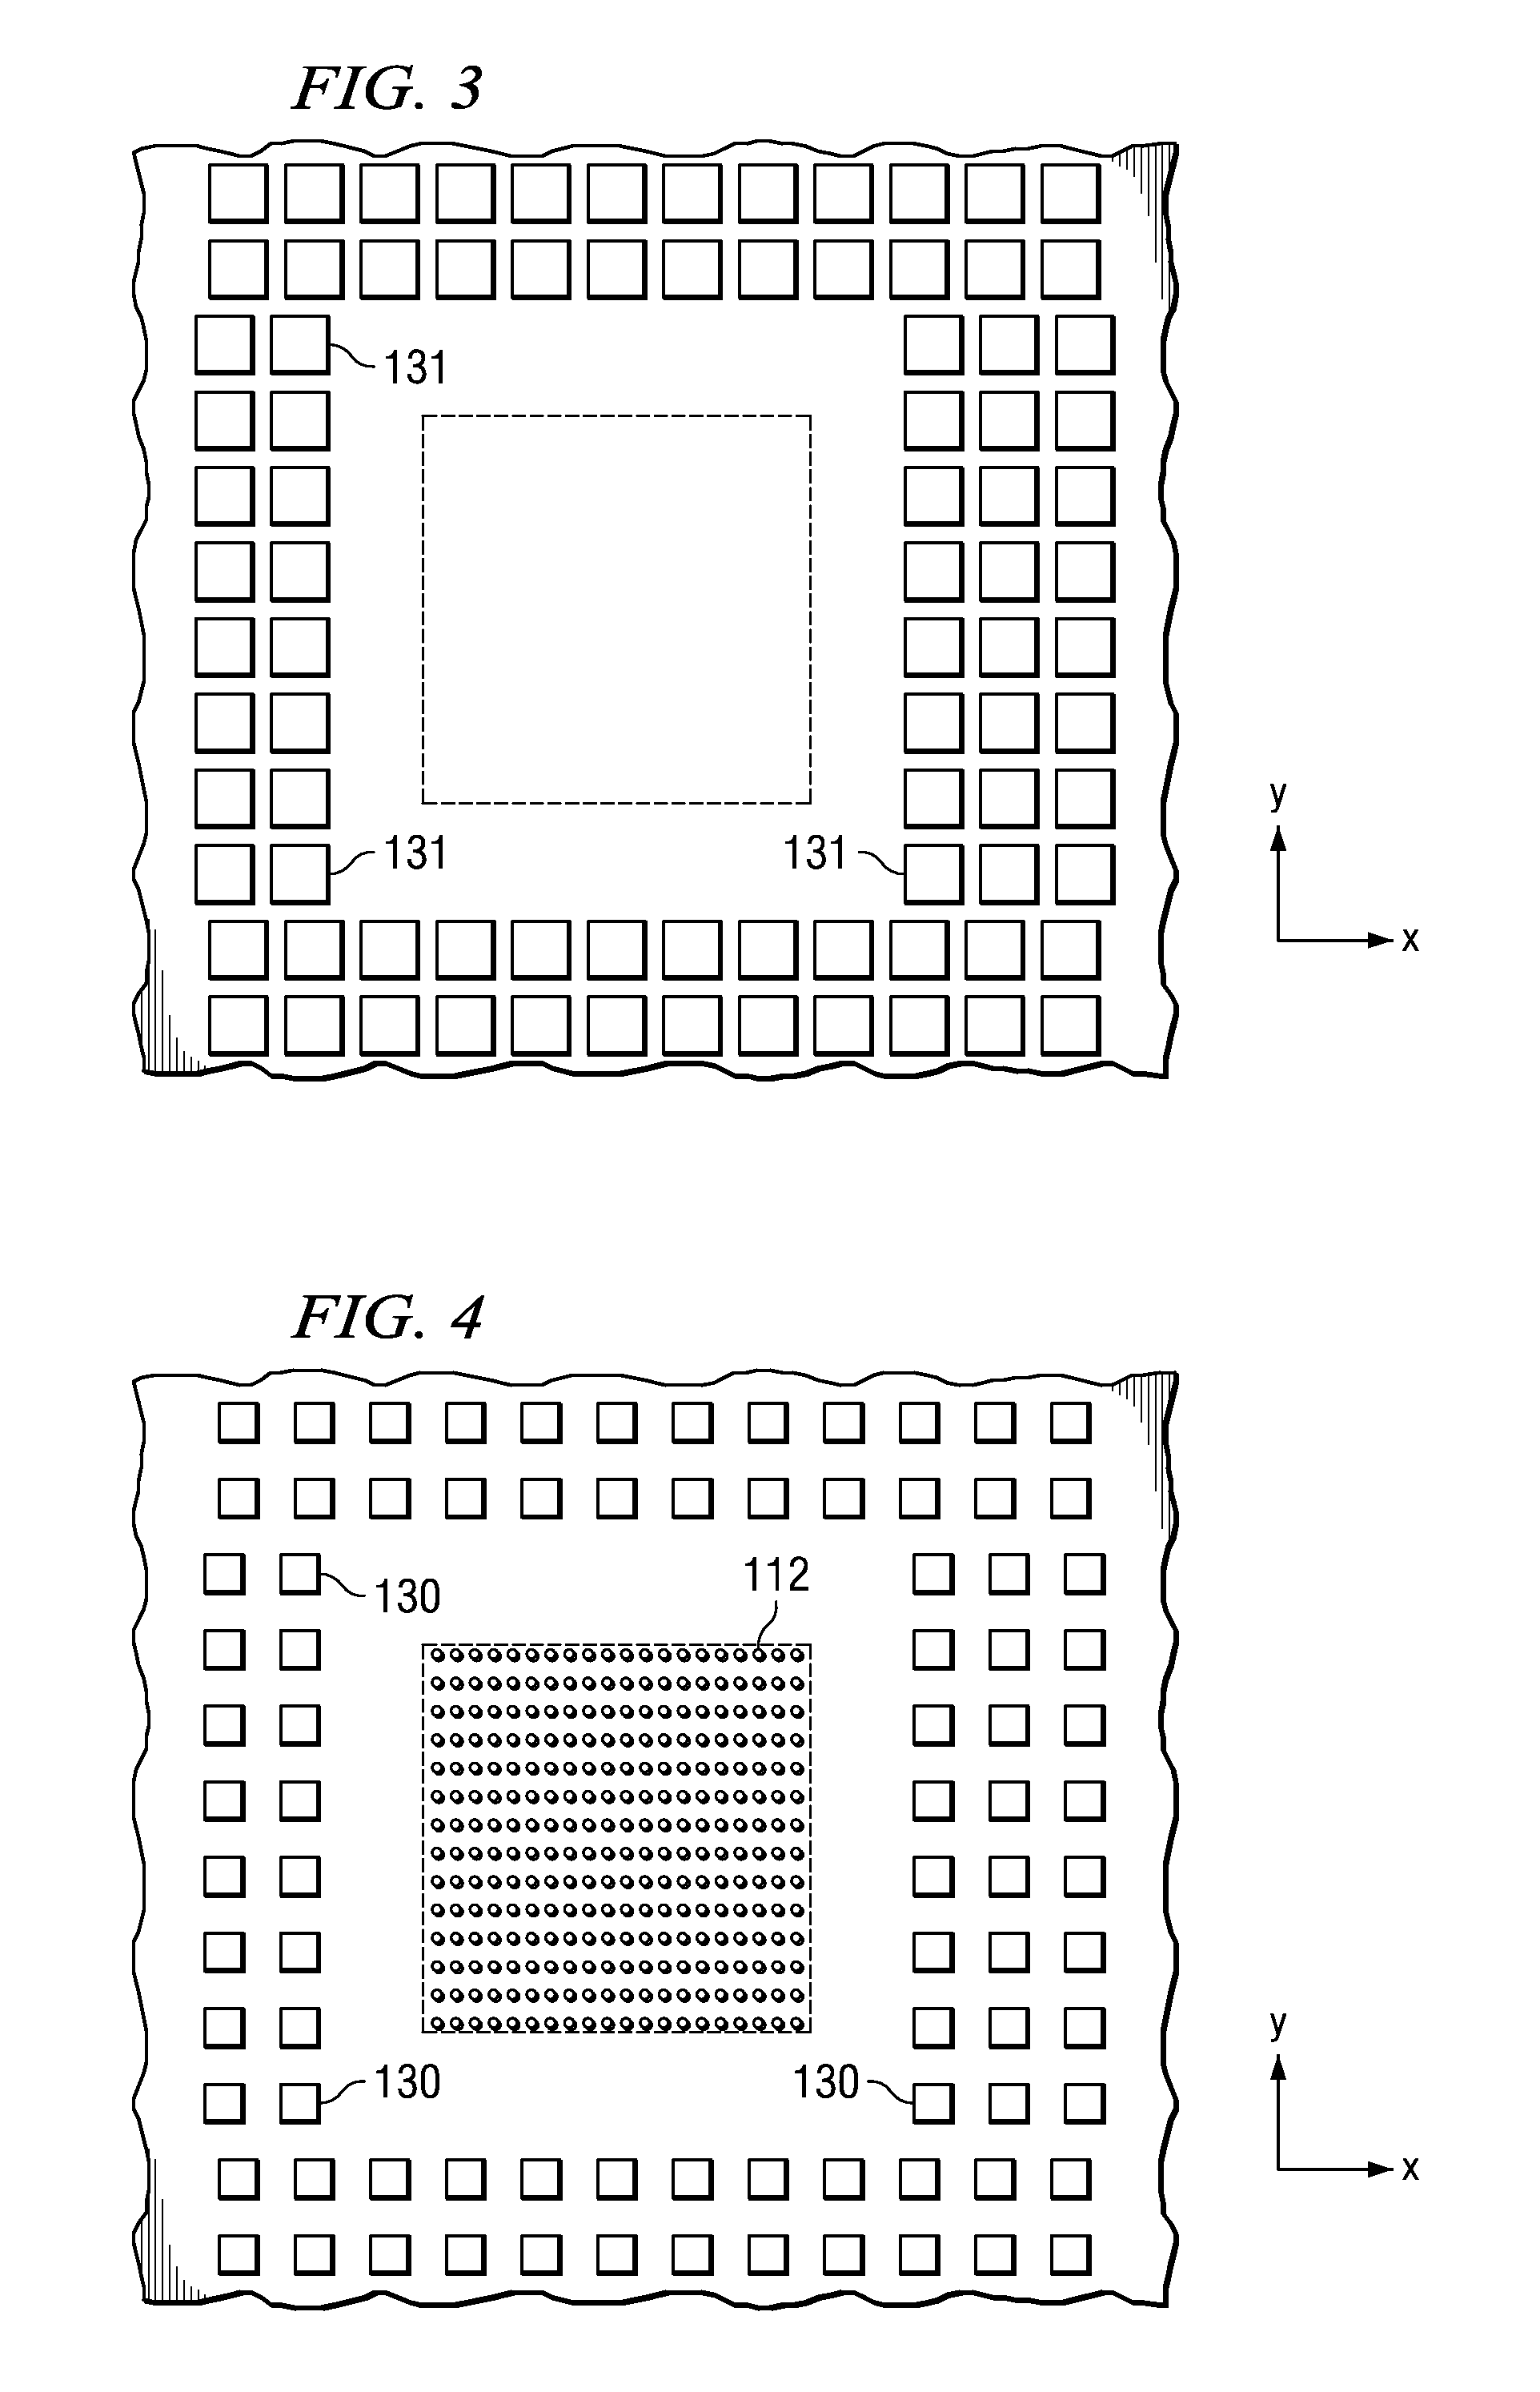 Array-Processed Stacked Semiconductor Packages